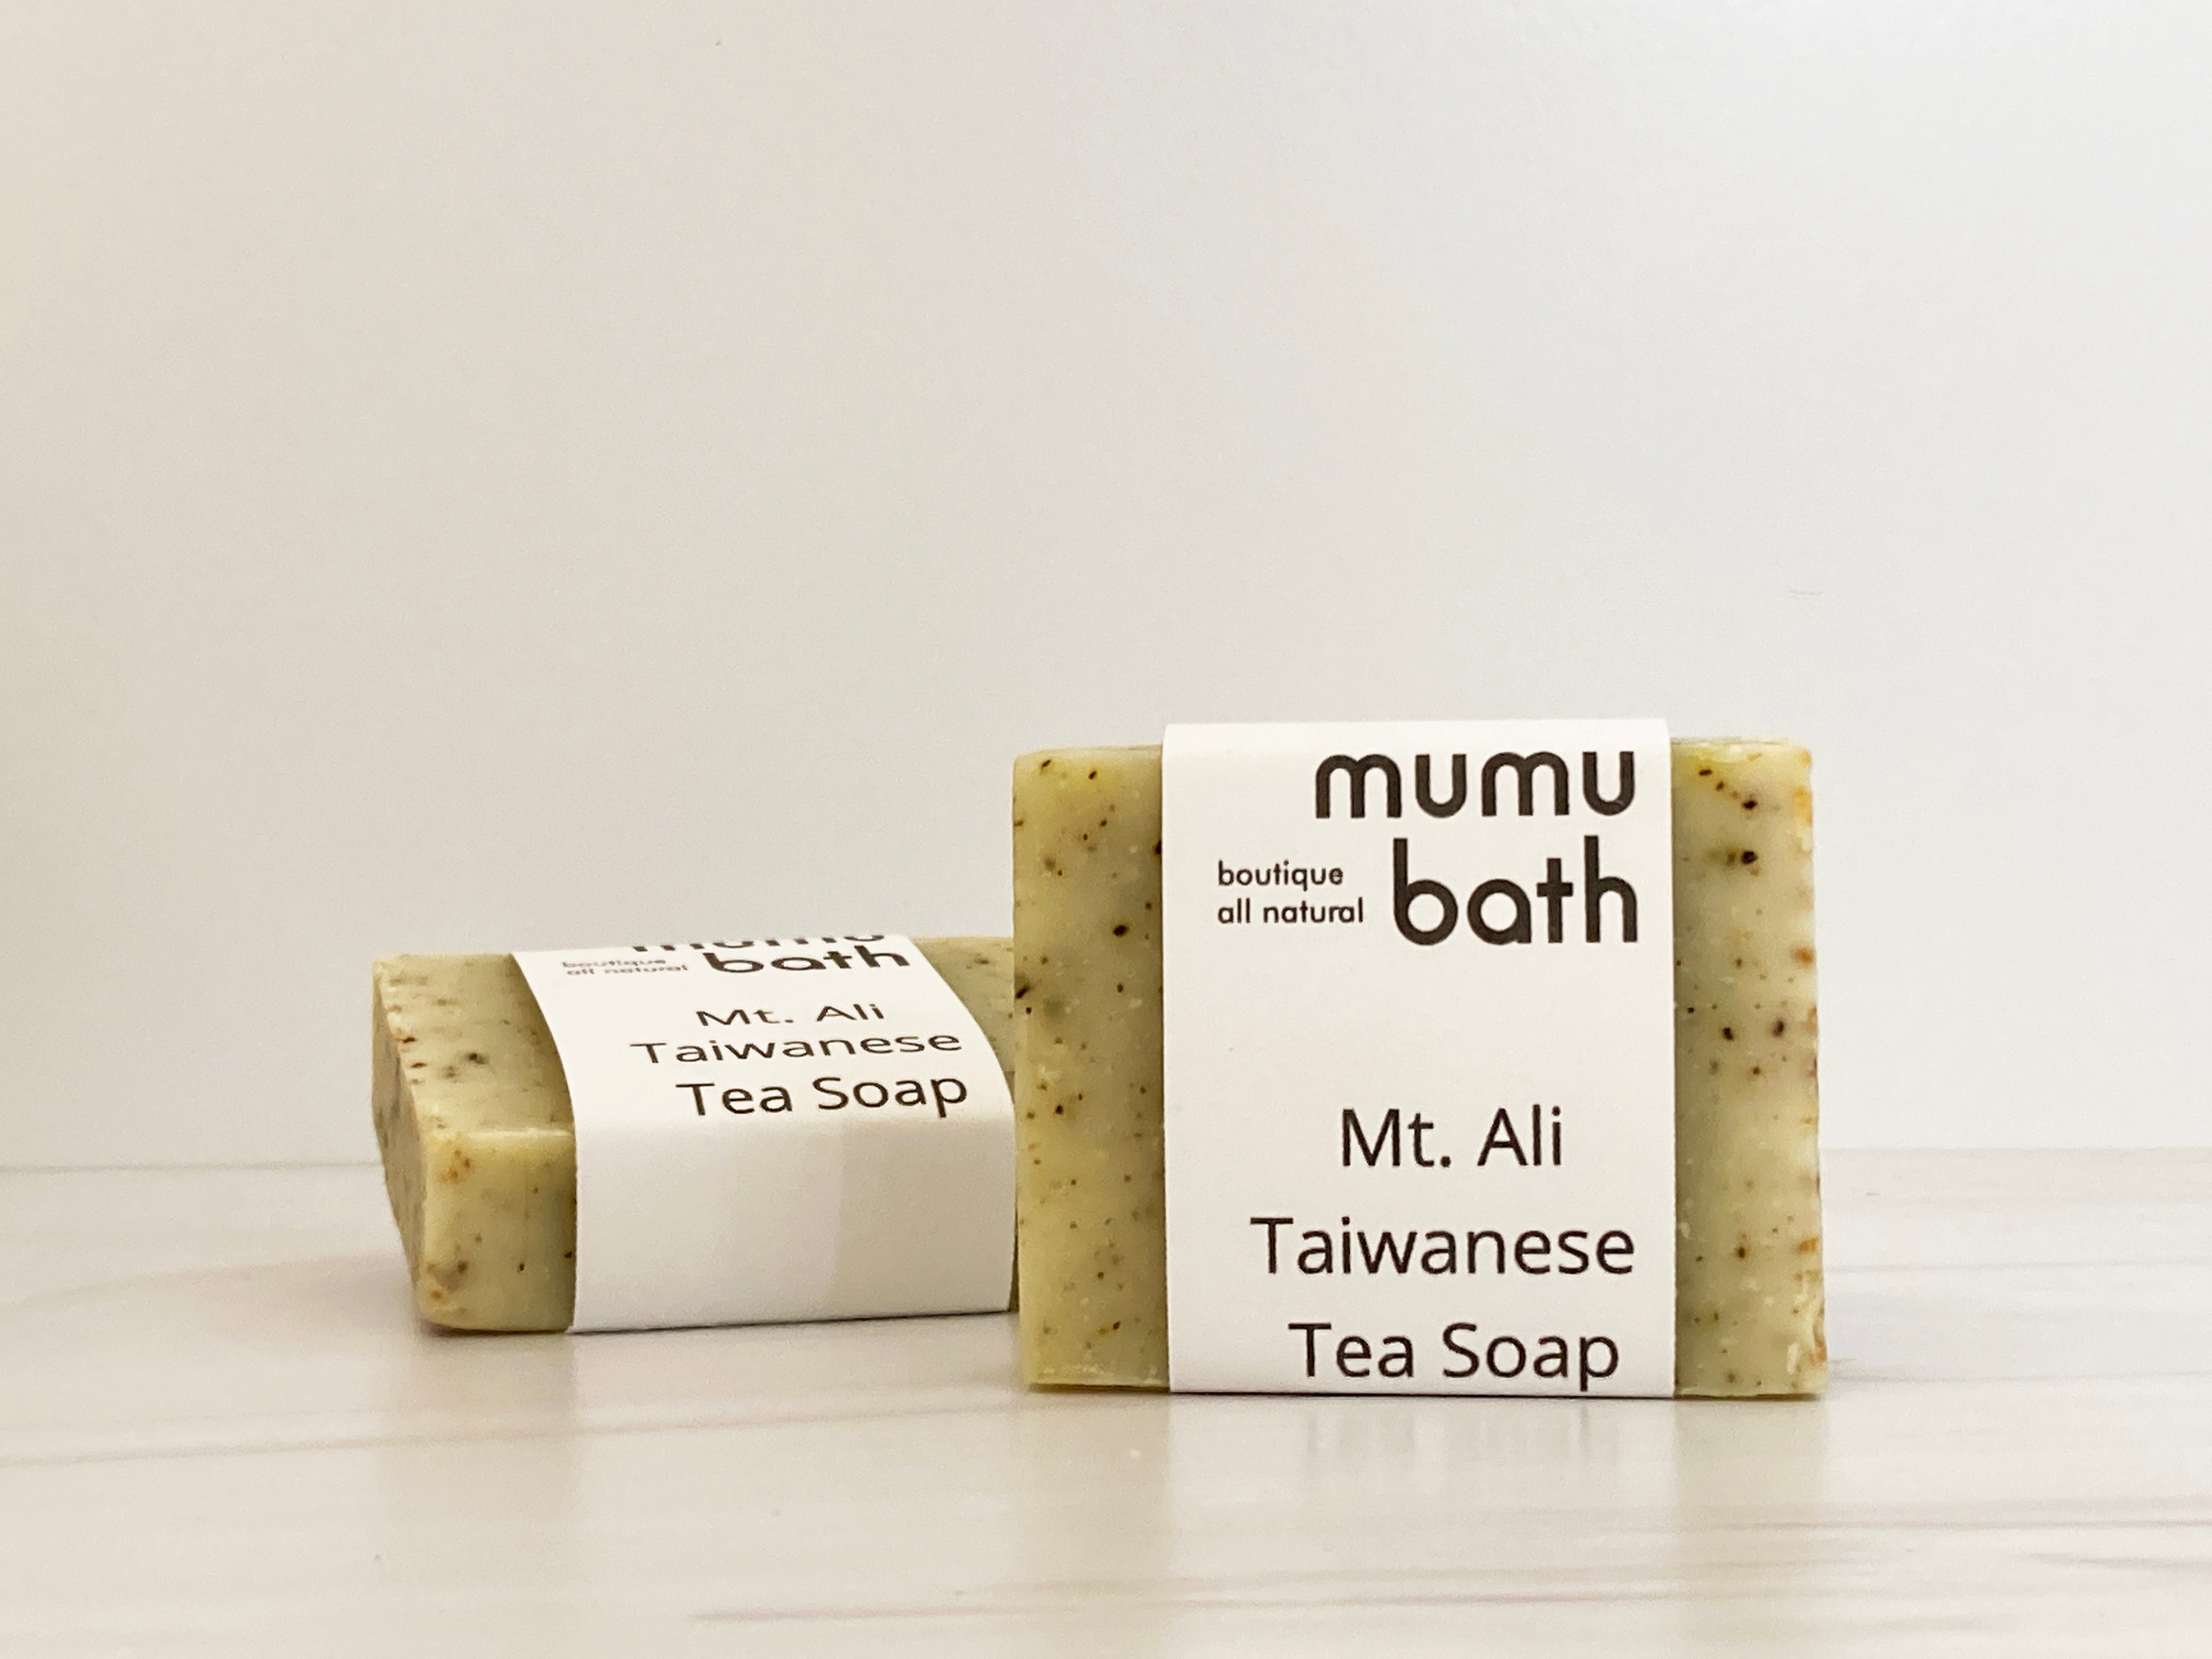 Experience the skin-nourishing benefits of Mt. Ali Taiwanese Tea Soap, made with all-natural ingredients sourced from the world-famous Mt. Ali tea region in Taiwan. This soap is rich in antioxidants, protects your skin, and contains vitamins for a healthy glow.